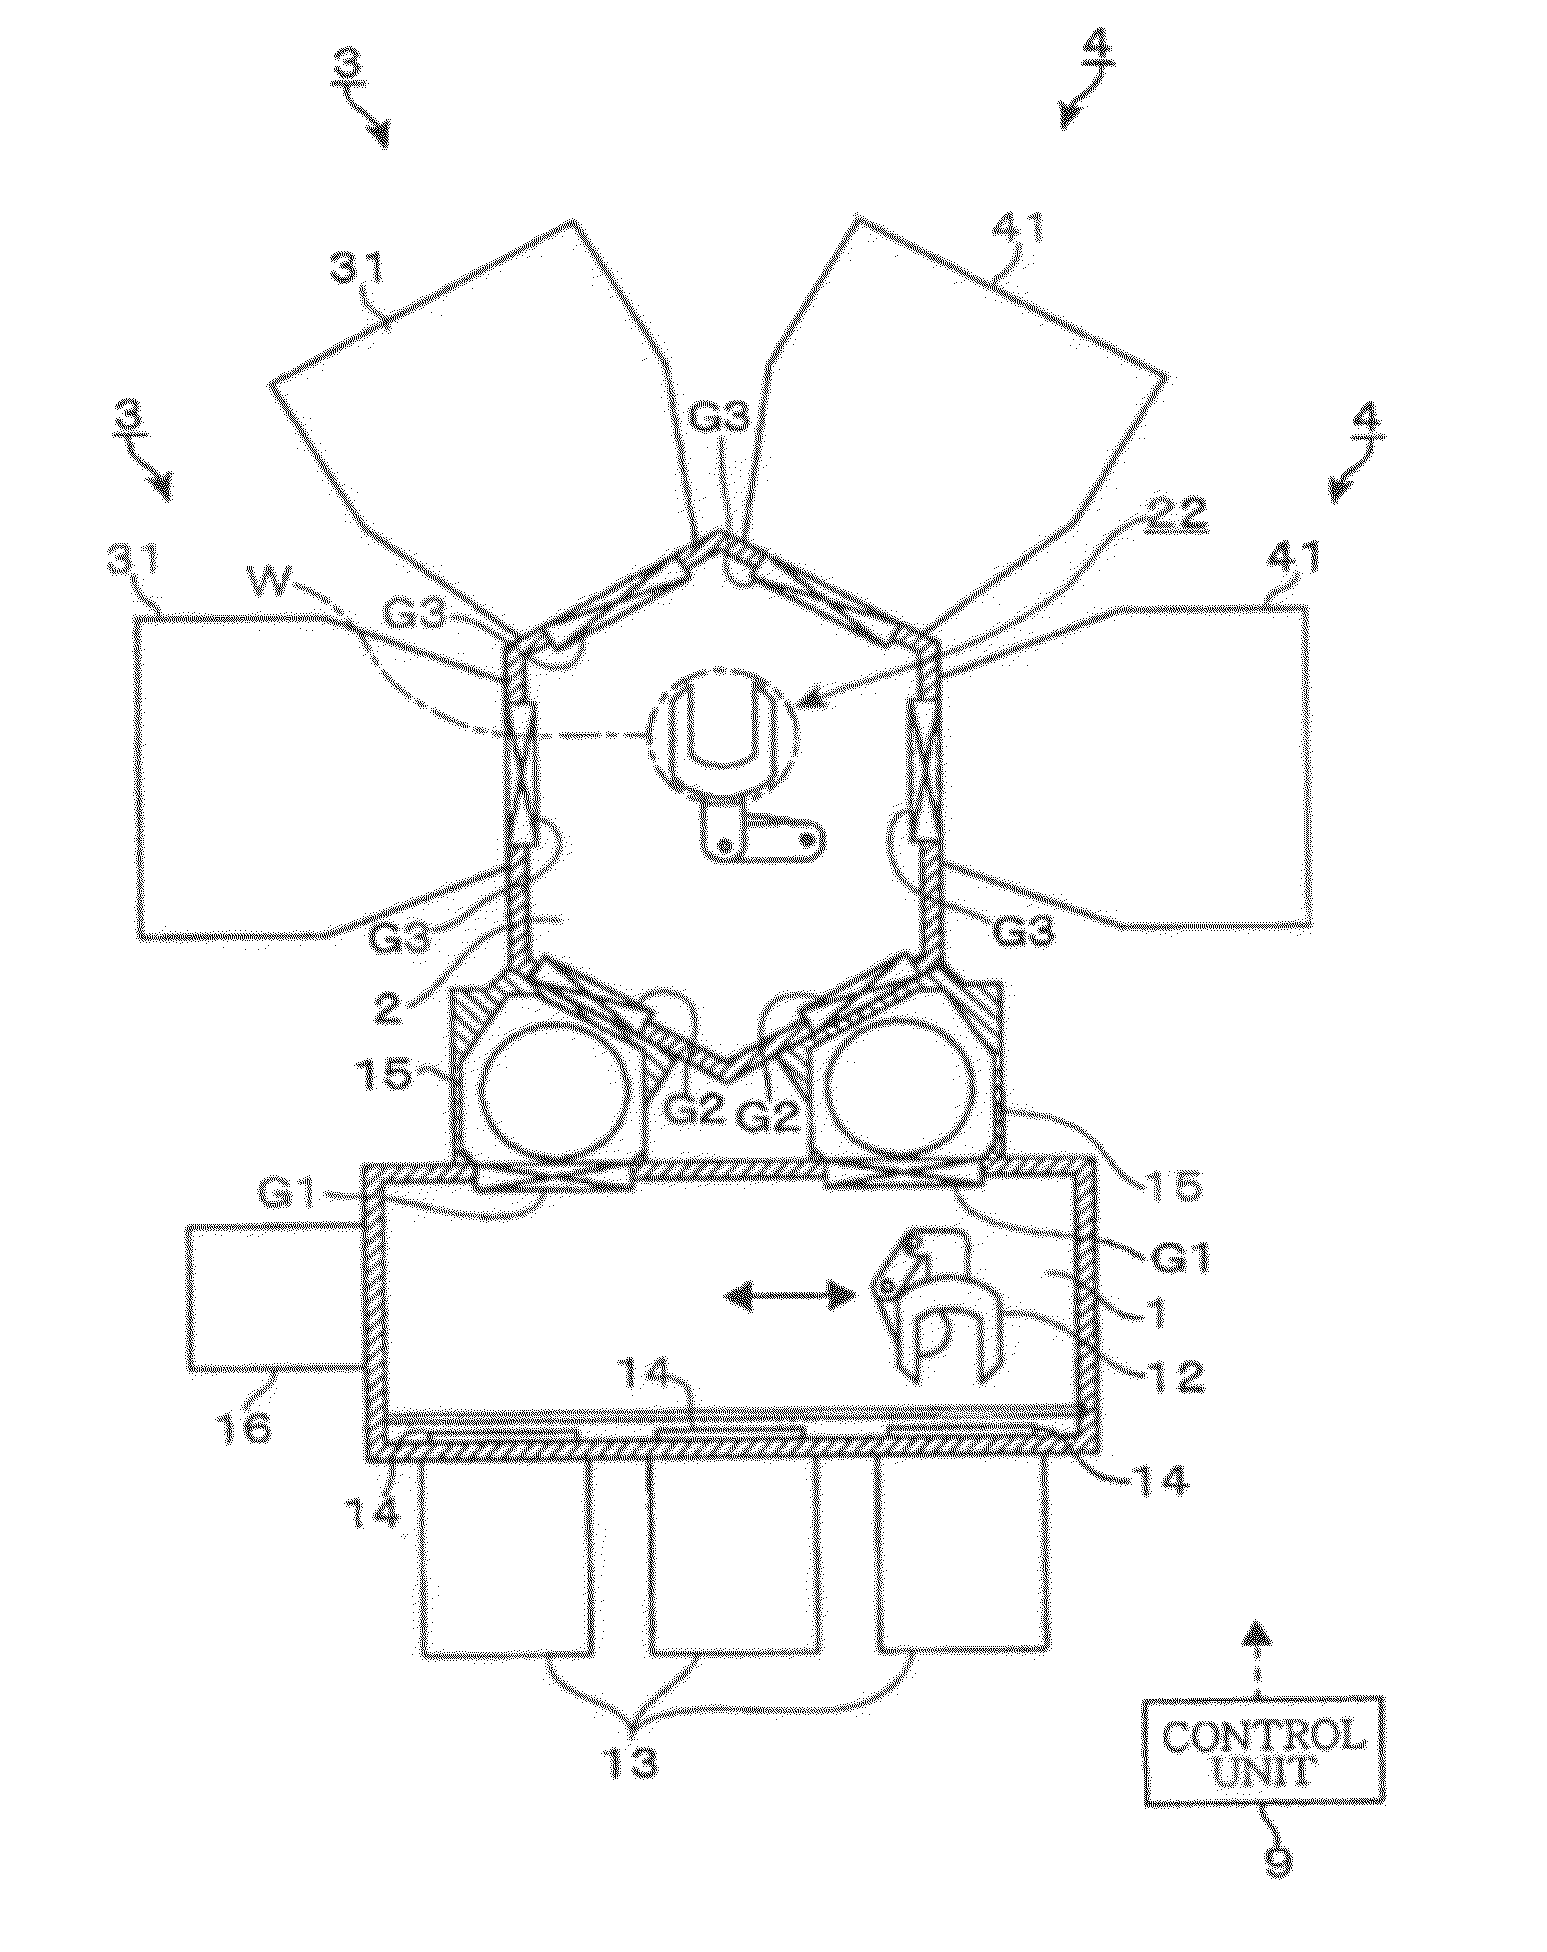 Substrate cleaning apparatus and vacuum processing system